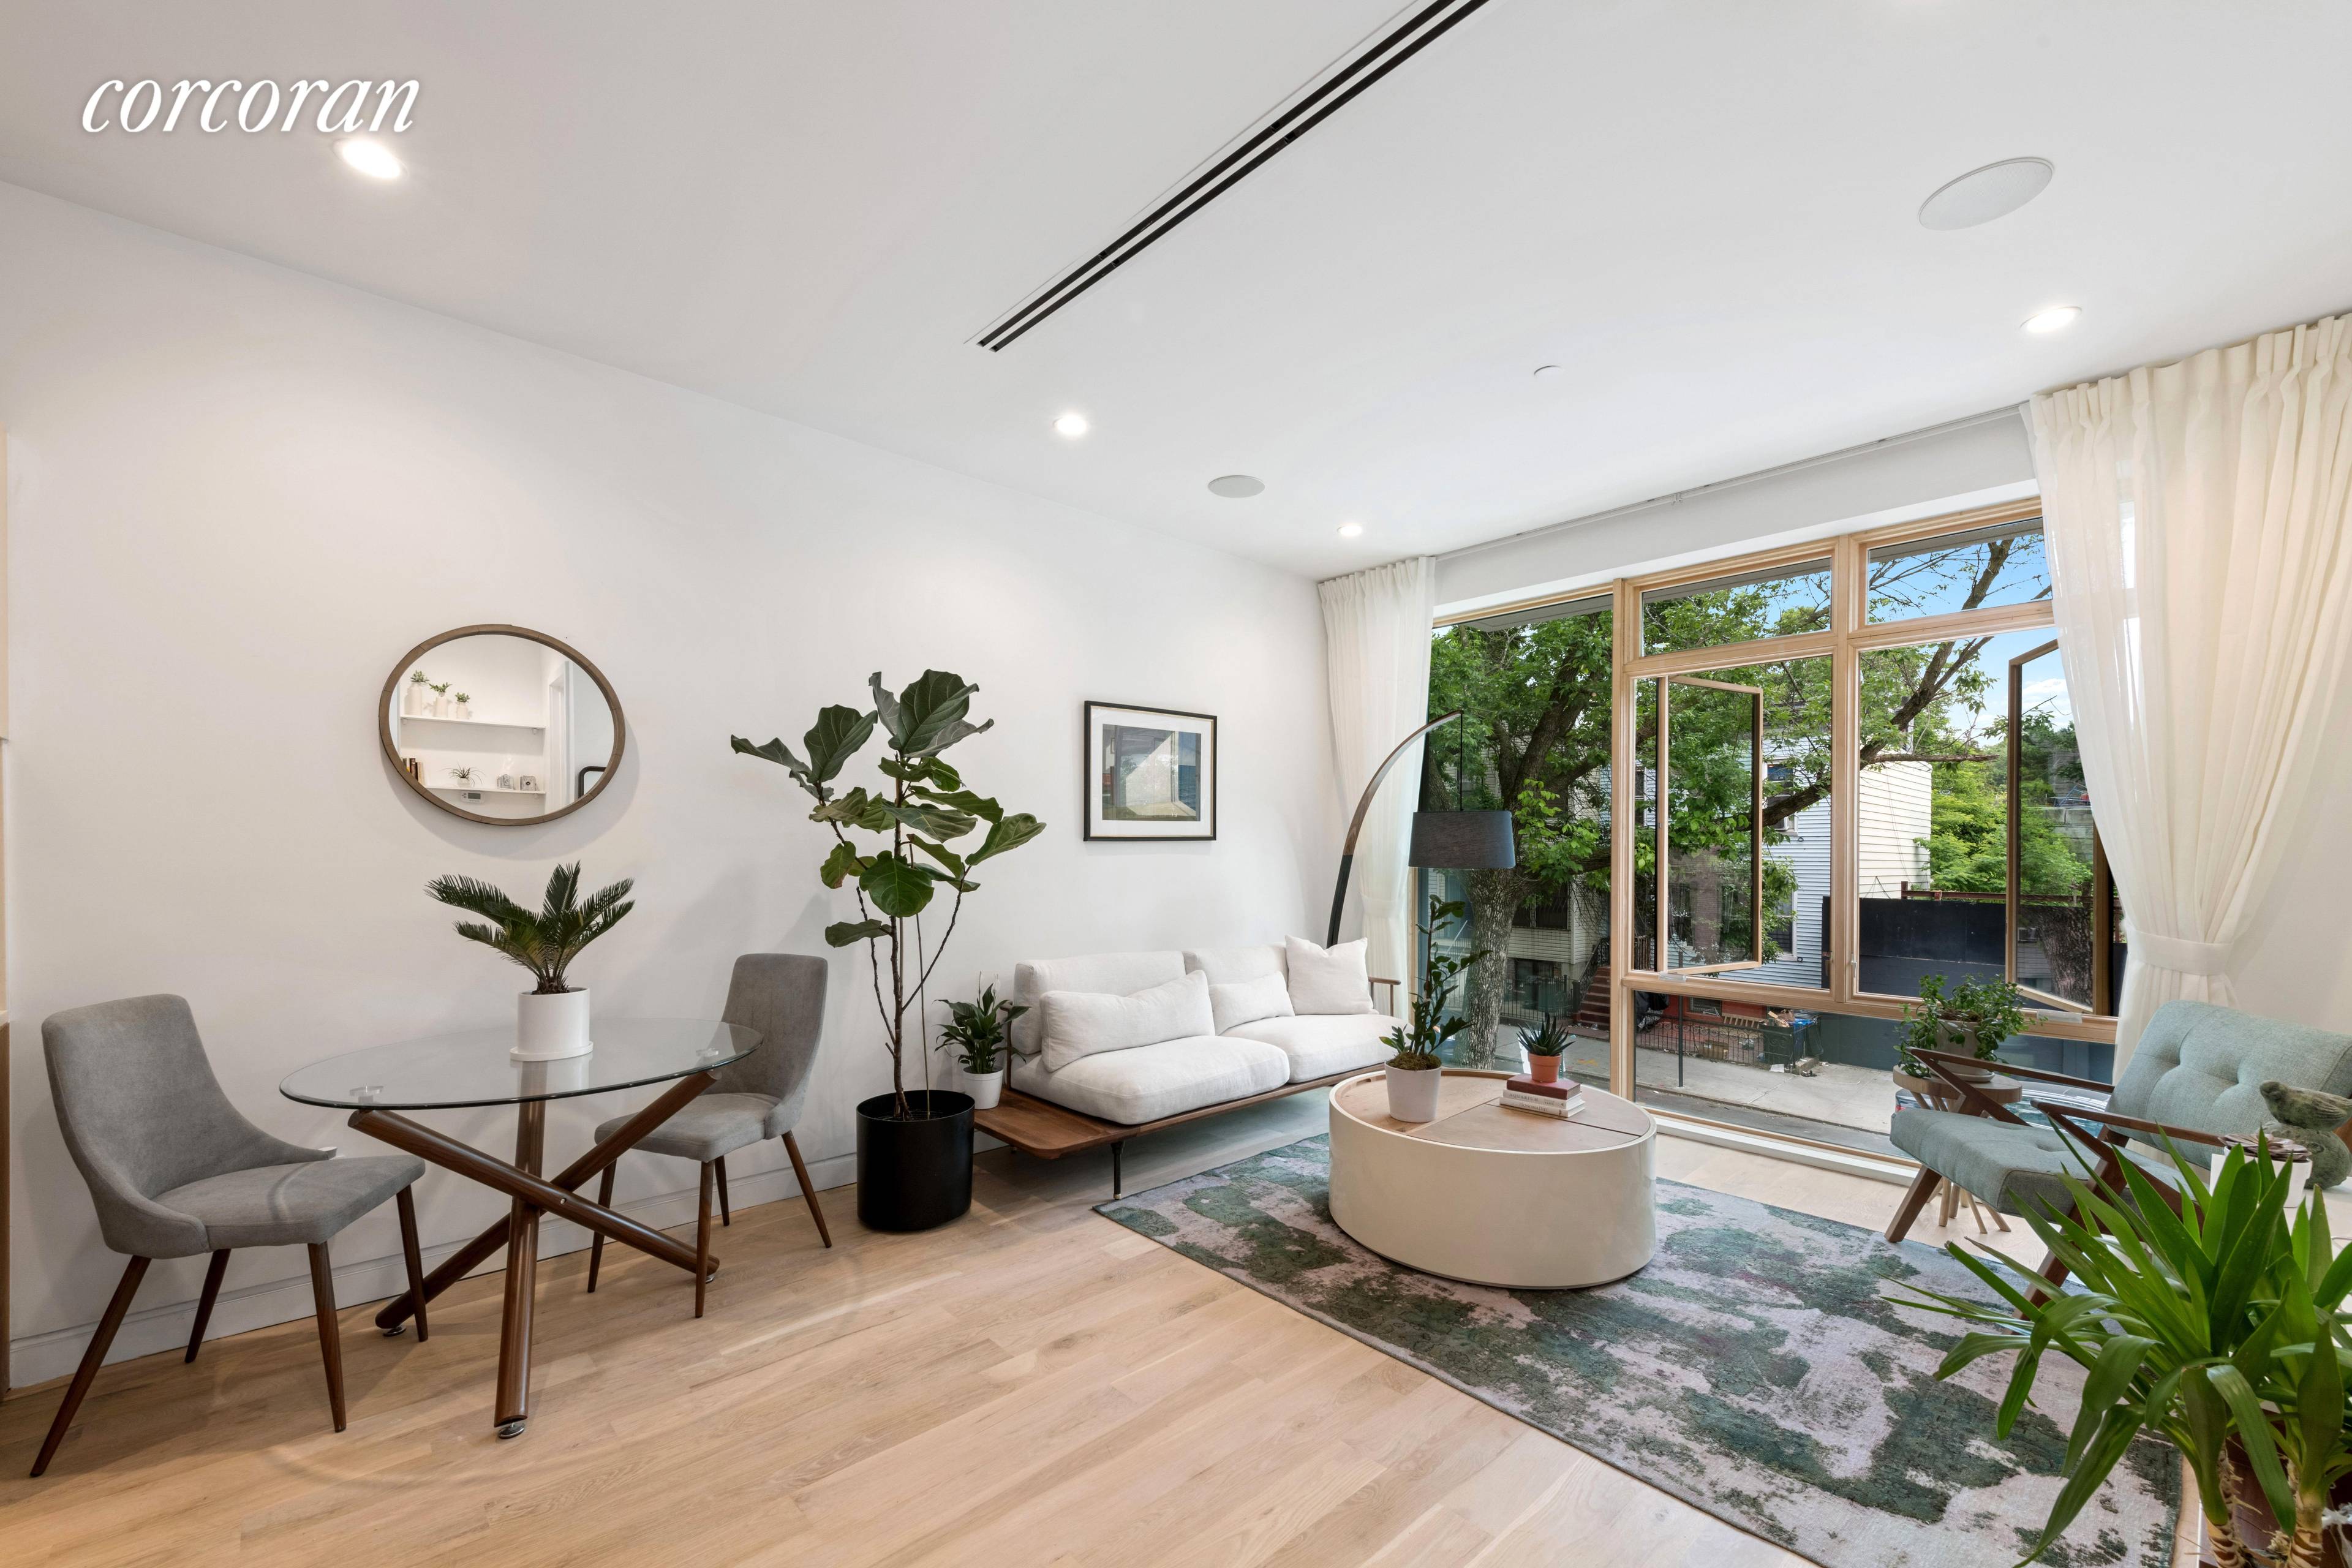 FOR IMMEDIATE OCCUPANCY 193 Moffat is a sleek modern 8 unit condominium, that rises above its neighbors with the artistic flair of surrounding Bushwick.